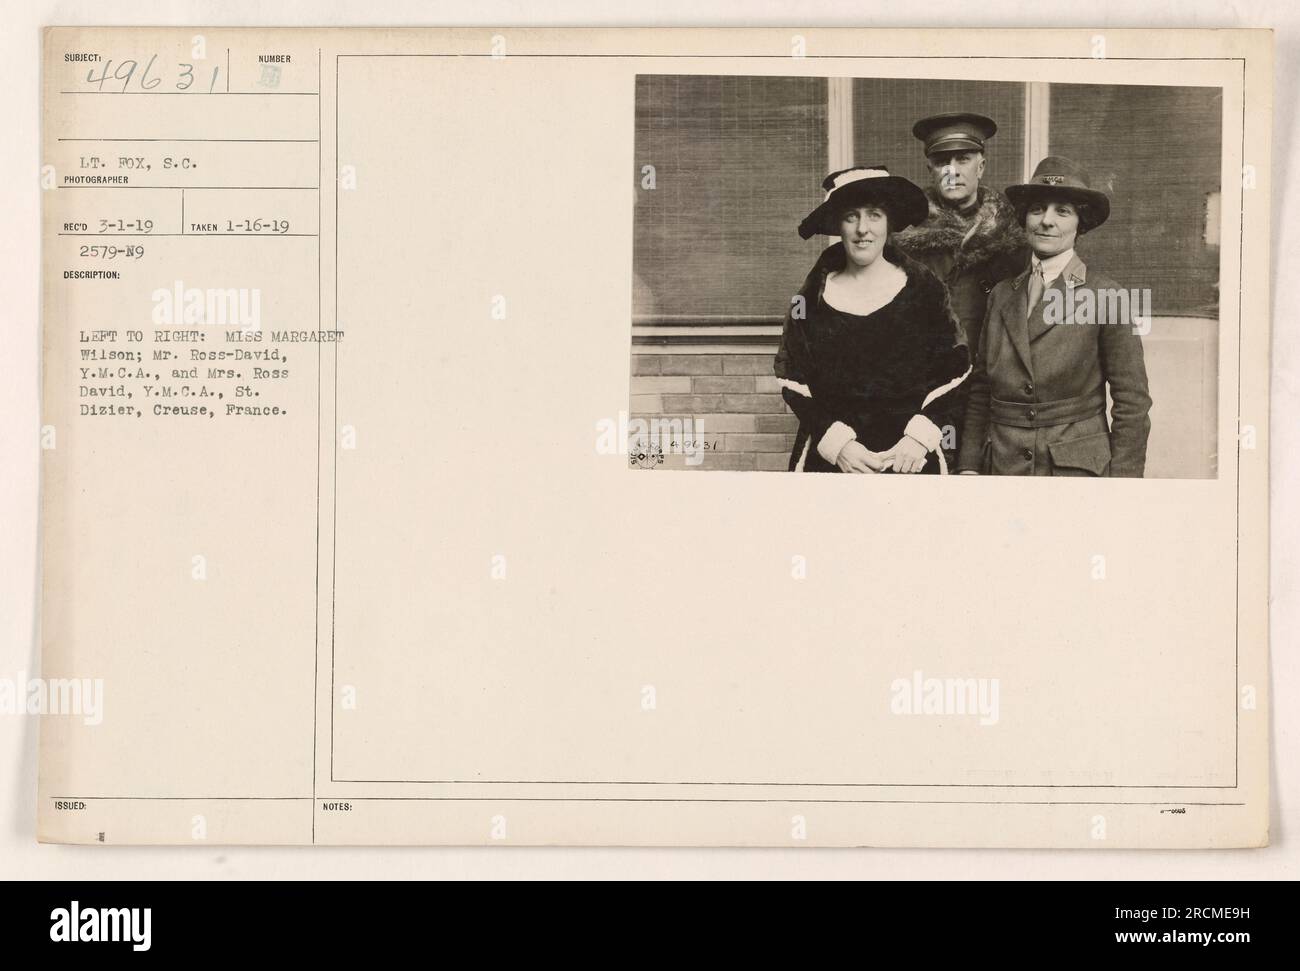 Left to right: Miss Margaret Wilson; Mr. Ross-David, Y.M.C.A.; and Mrs. Ross-David, Y.M.C.A. at St. Dizier, Creuse, France. This photo was taken on January 16, 1919, and received on March 1, 1919. Lieutenant Fox, S.C., was the photographer. The photo's description number is 2579-N9. Stock Photo